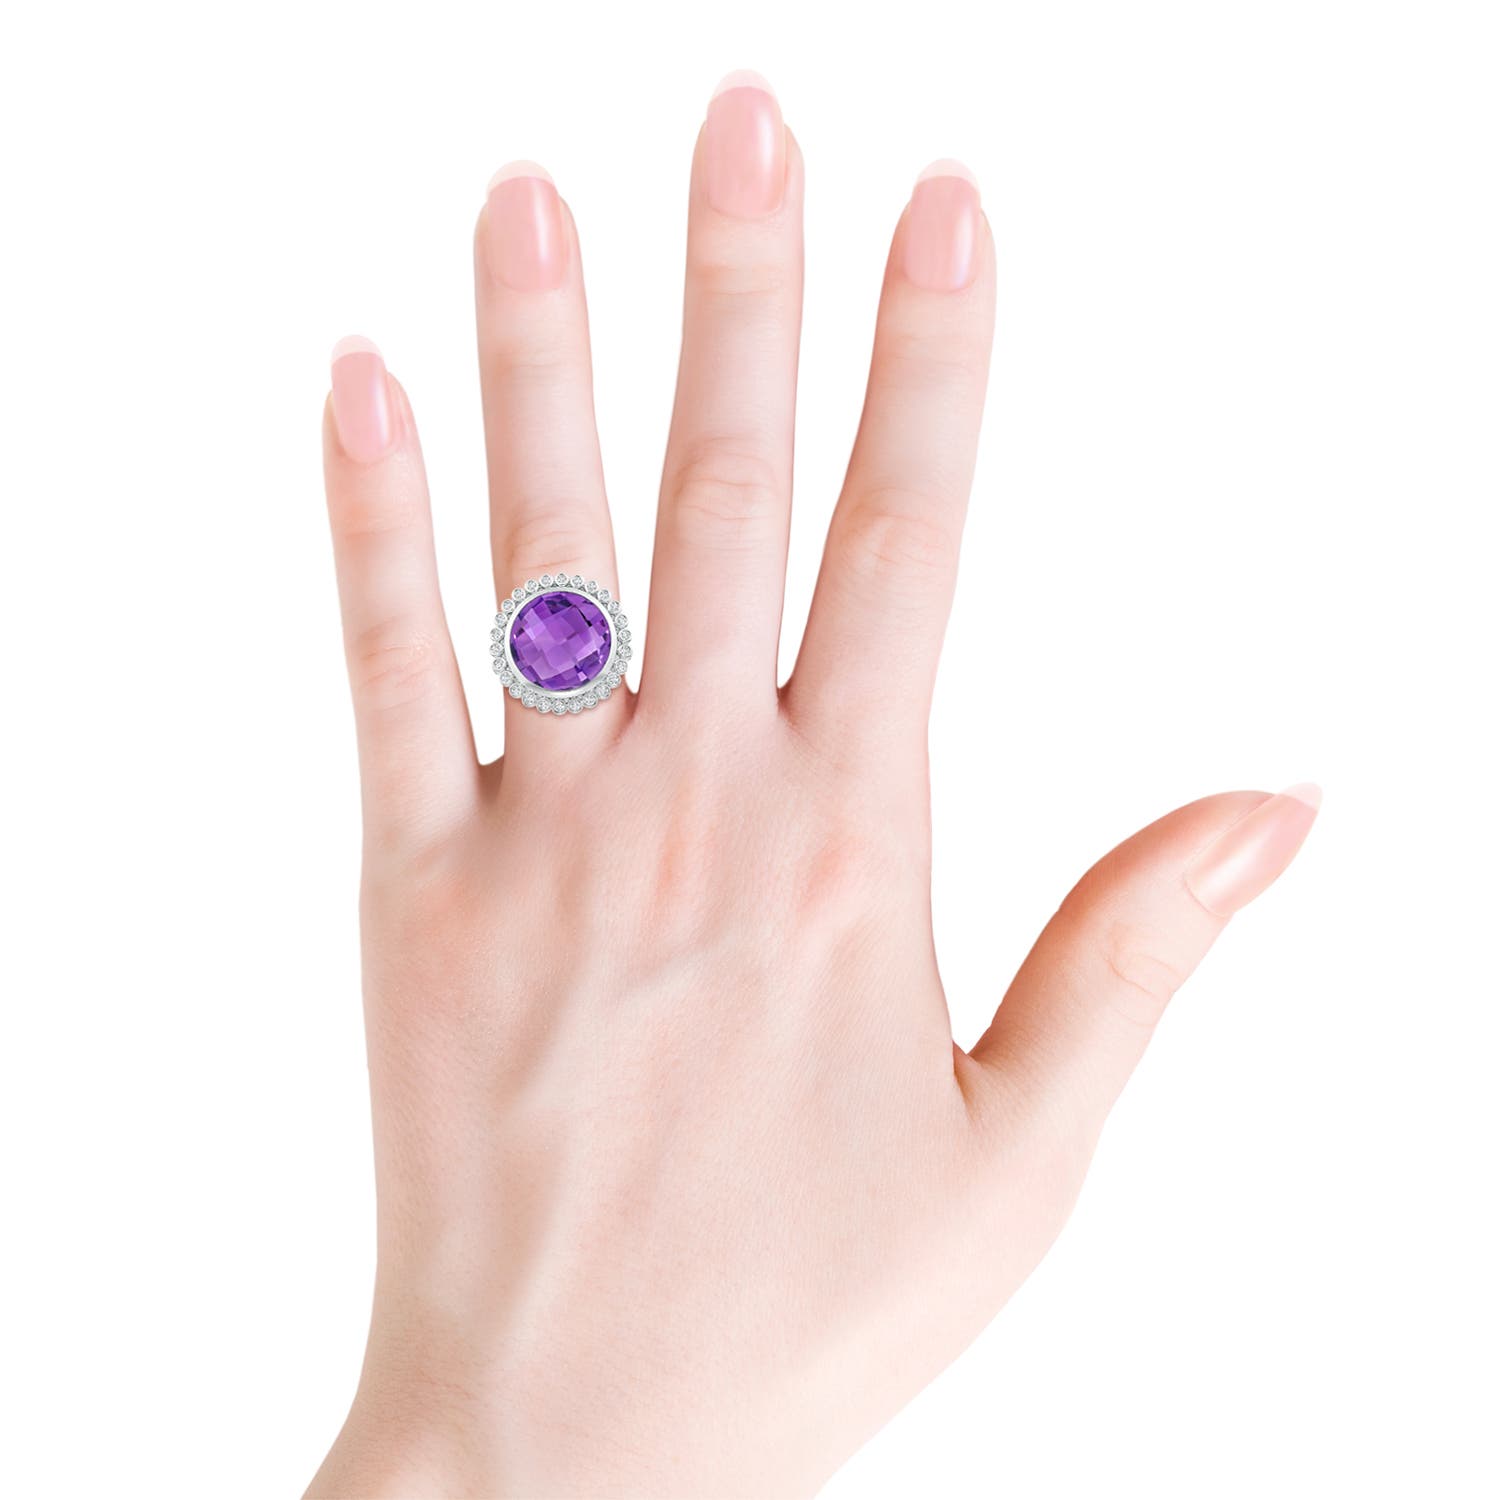 AA - Amethyst / 8.16 CT / 14 KT White Gold